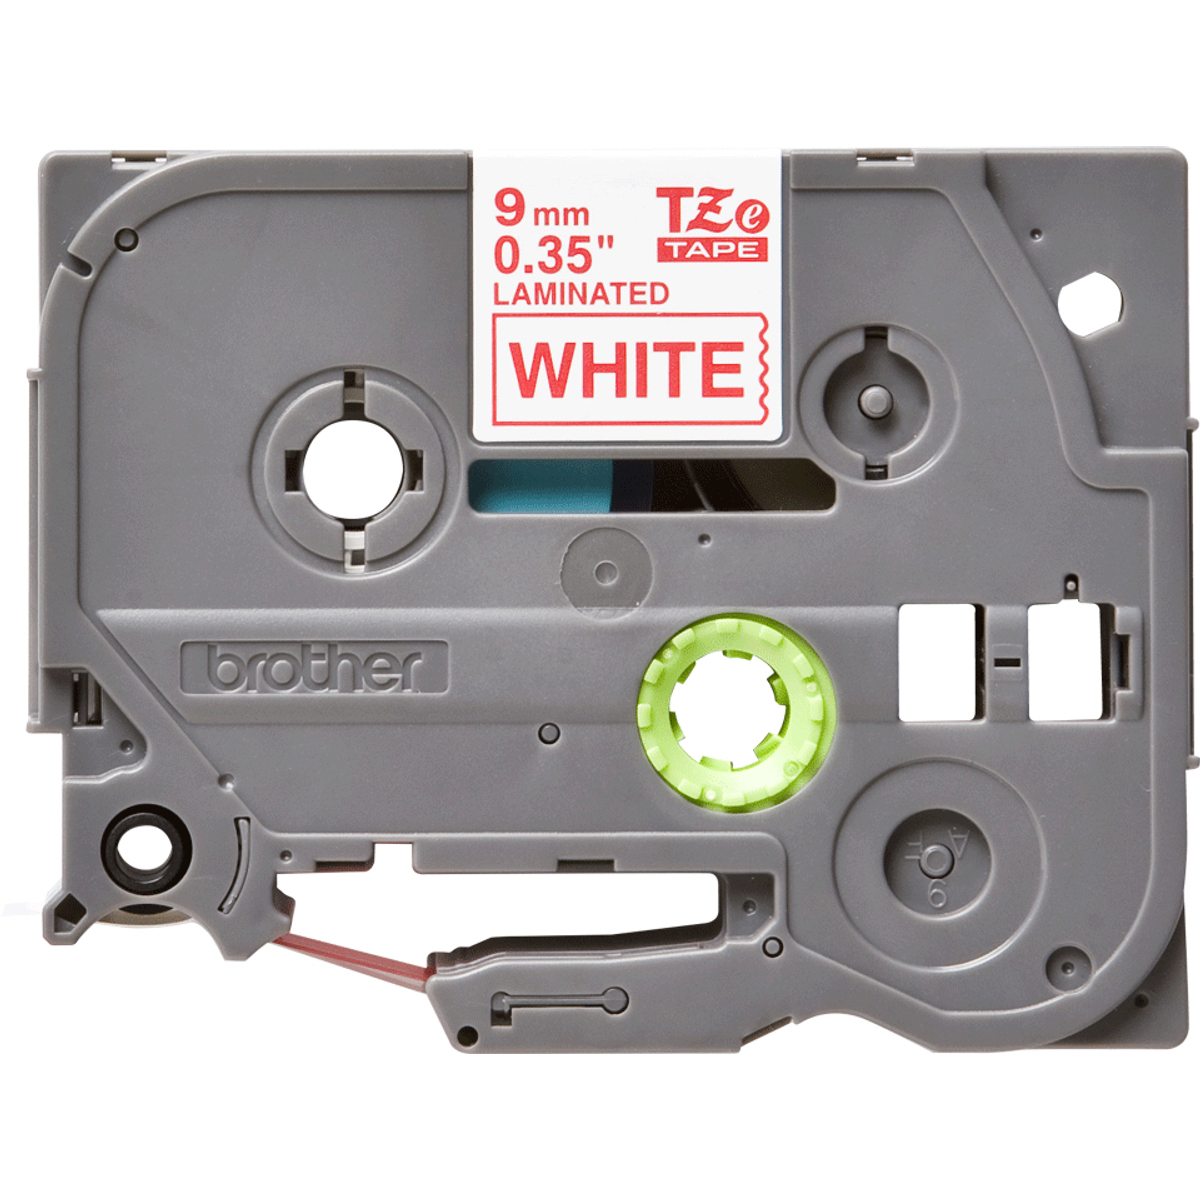 TZE222 9mm Red On White Label Tape